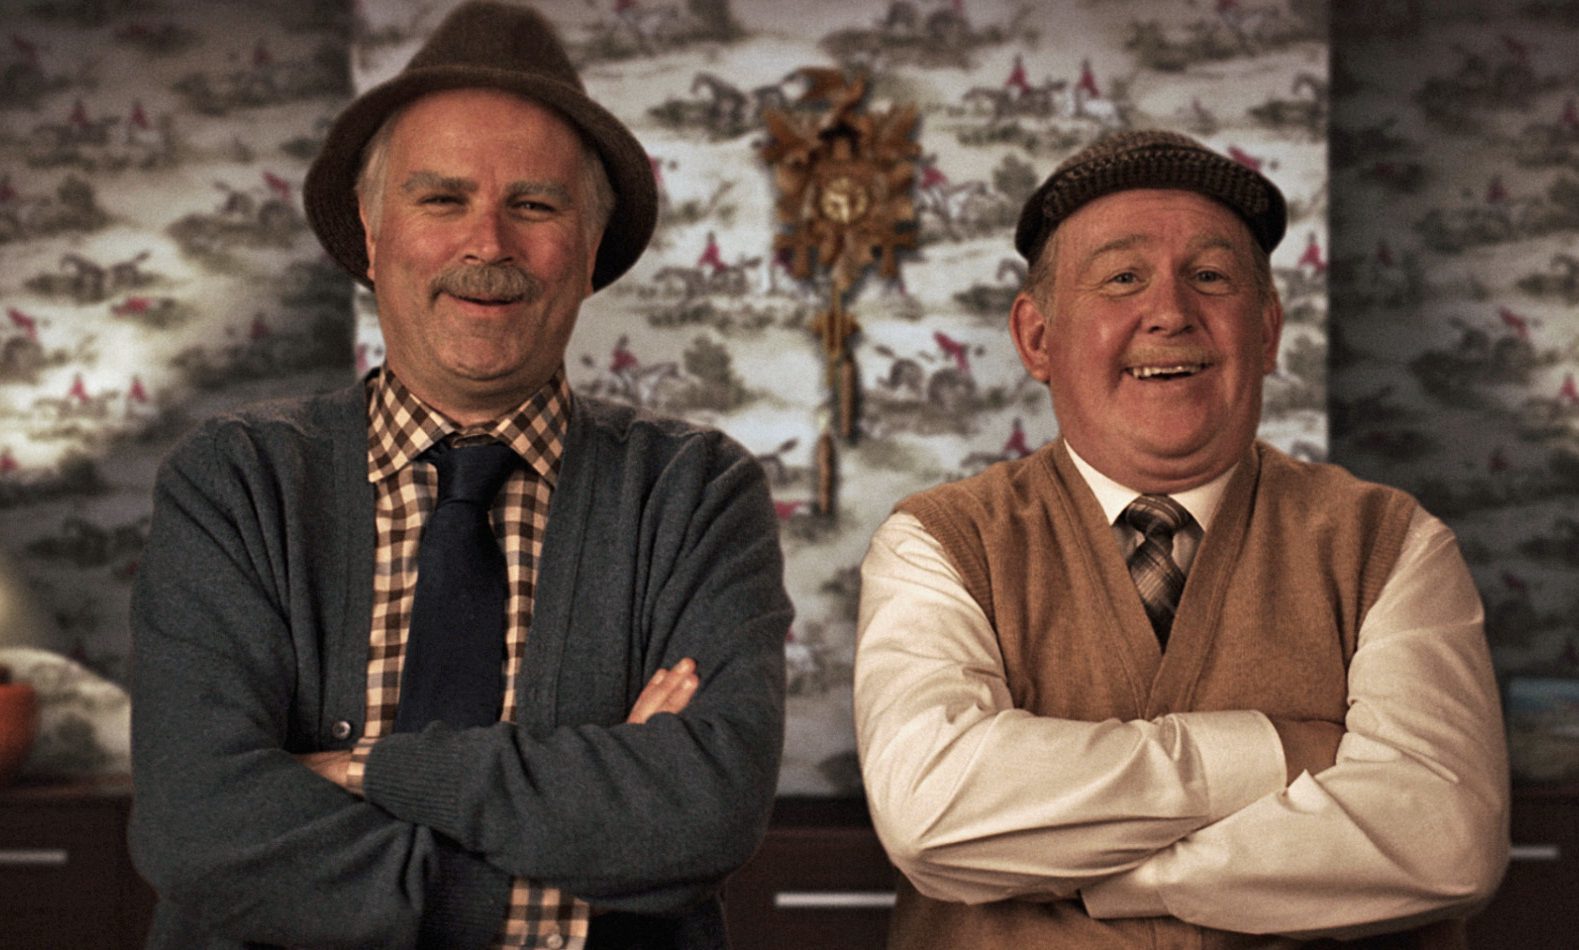 Victor McDade, played by Greg Hemphill, and Jack Jarvis, played by Ford Kiernan.